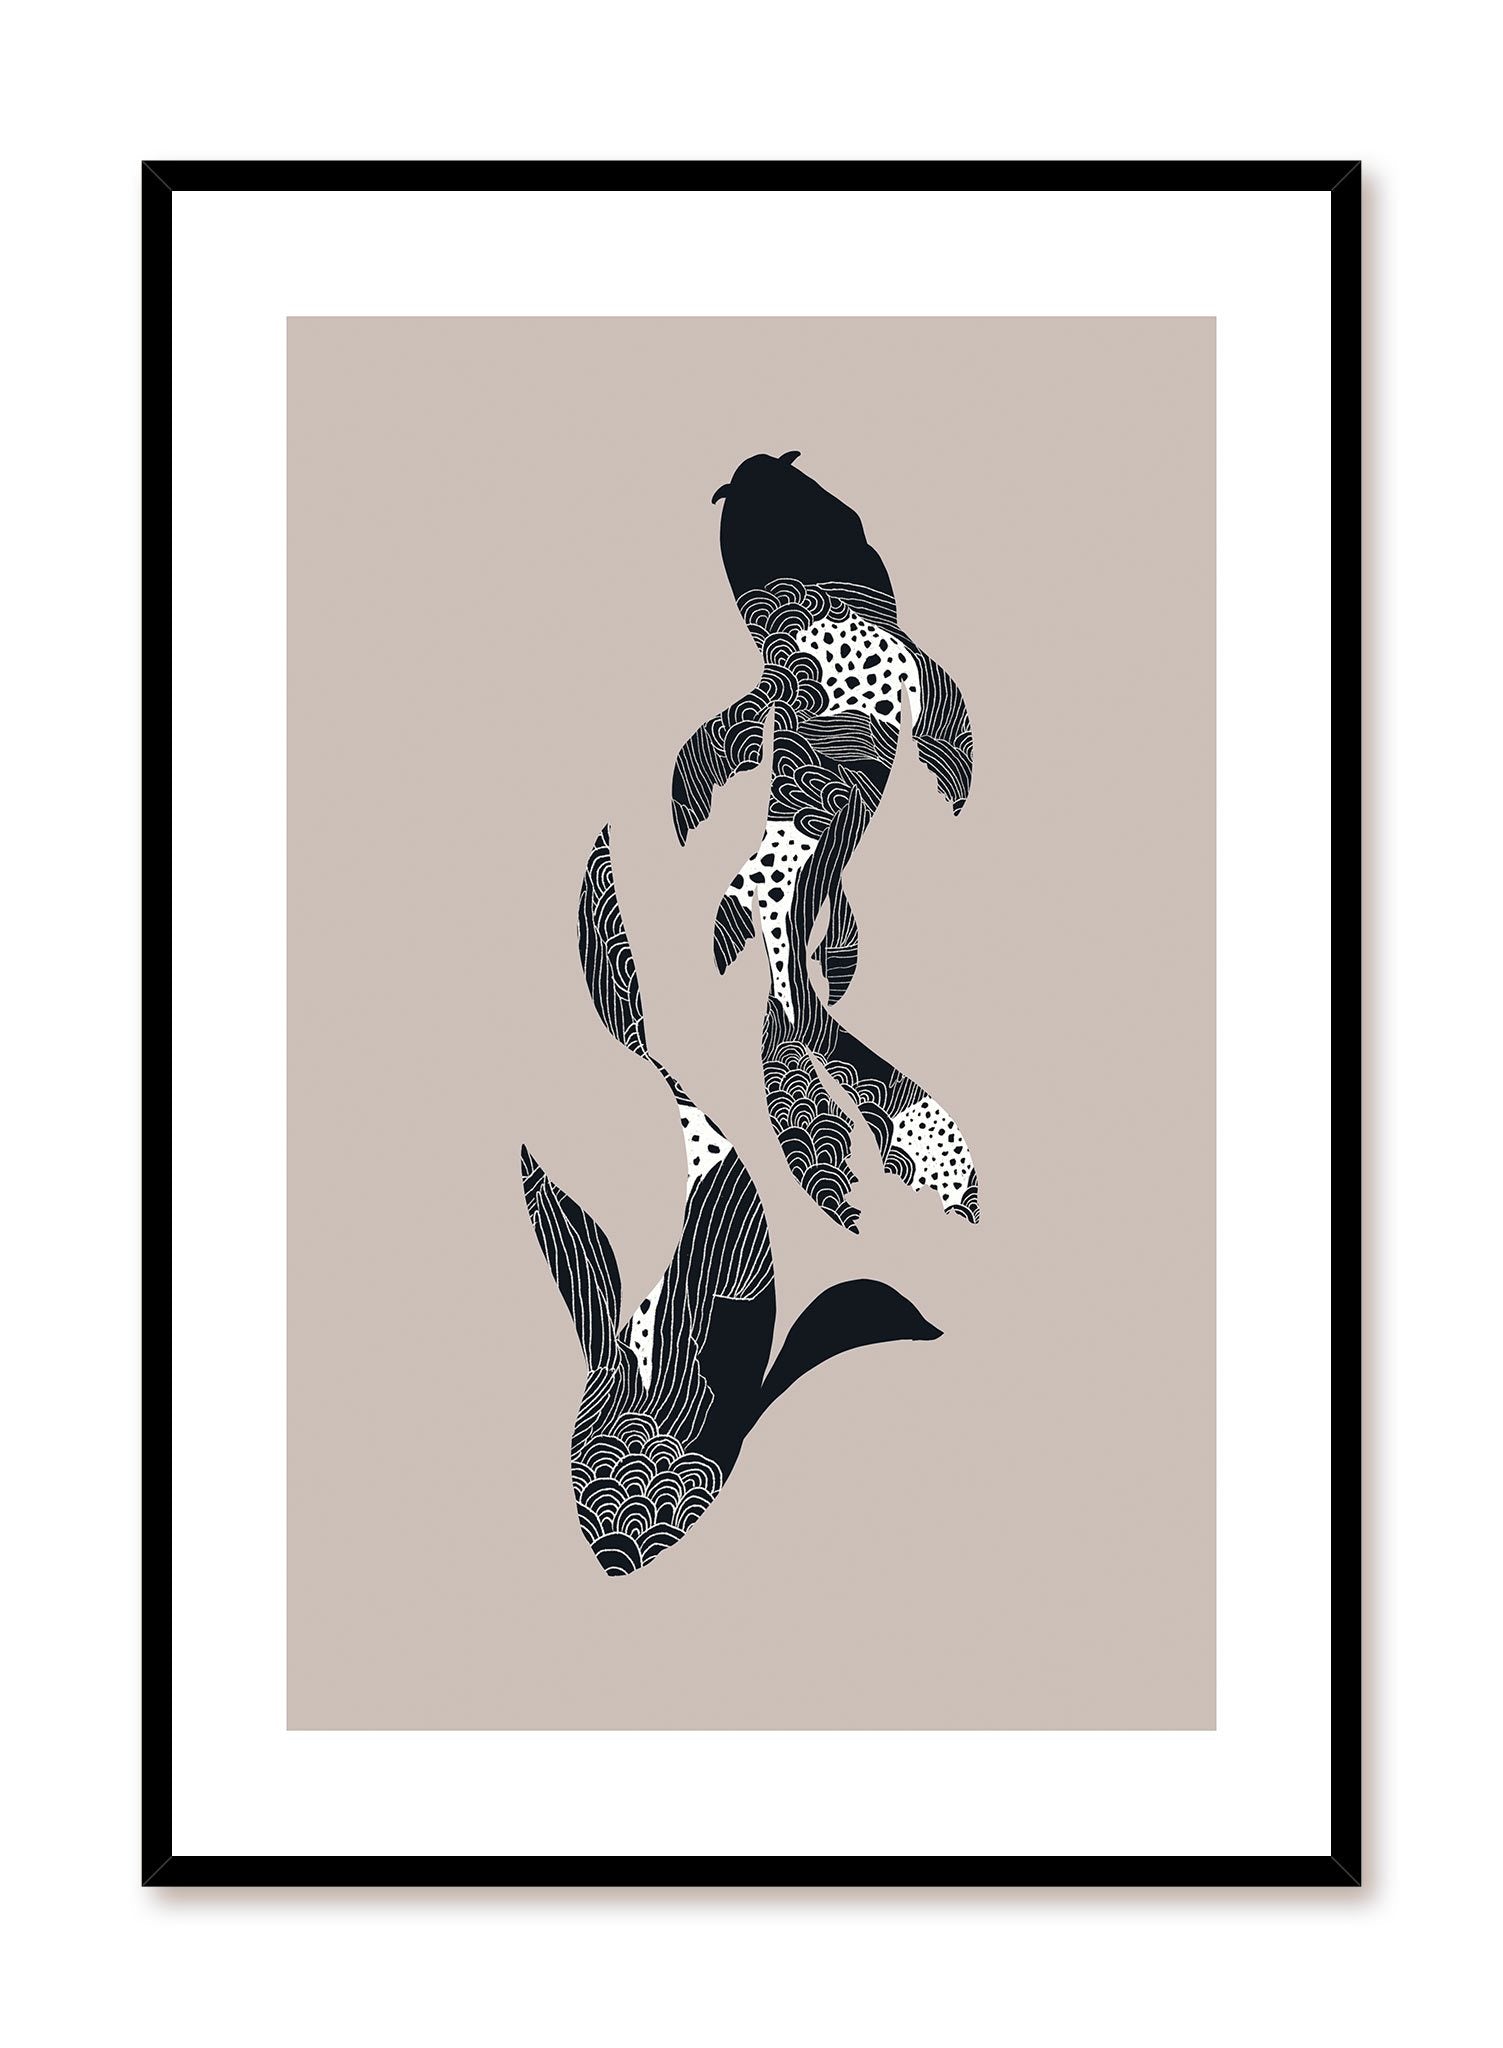 Fish in Water is a minimalist illustration by Opposite Wall of two patterned koi fishes swimming away from each other.